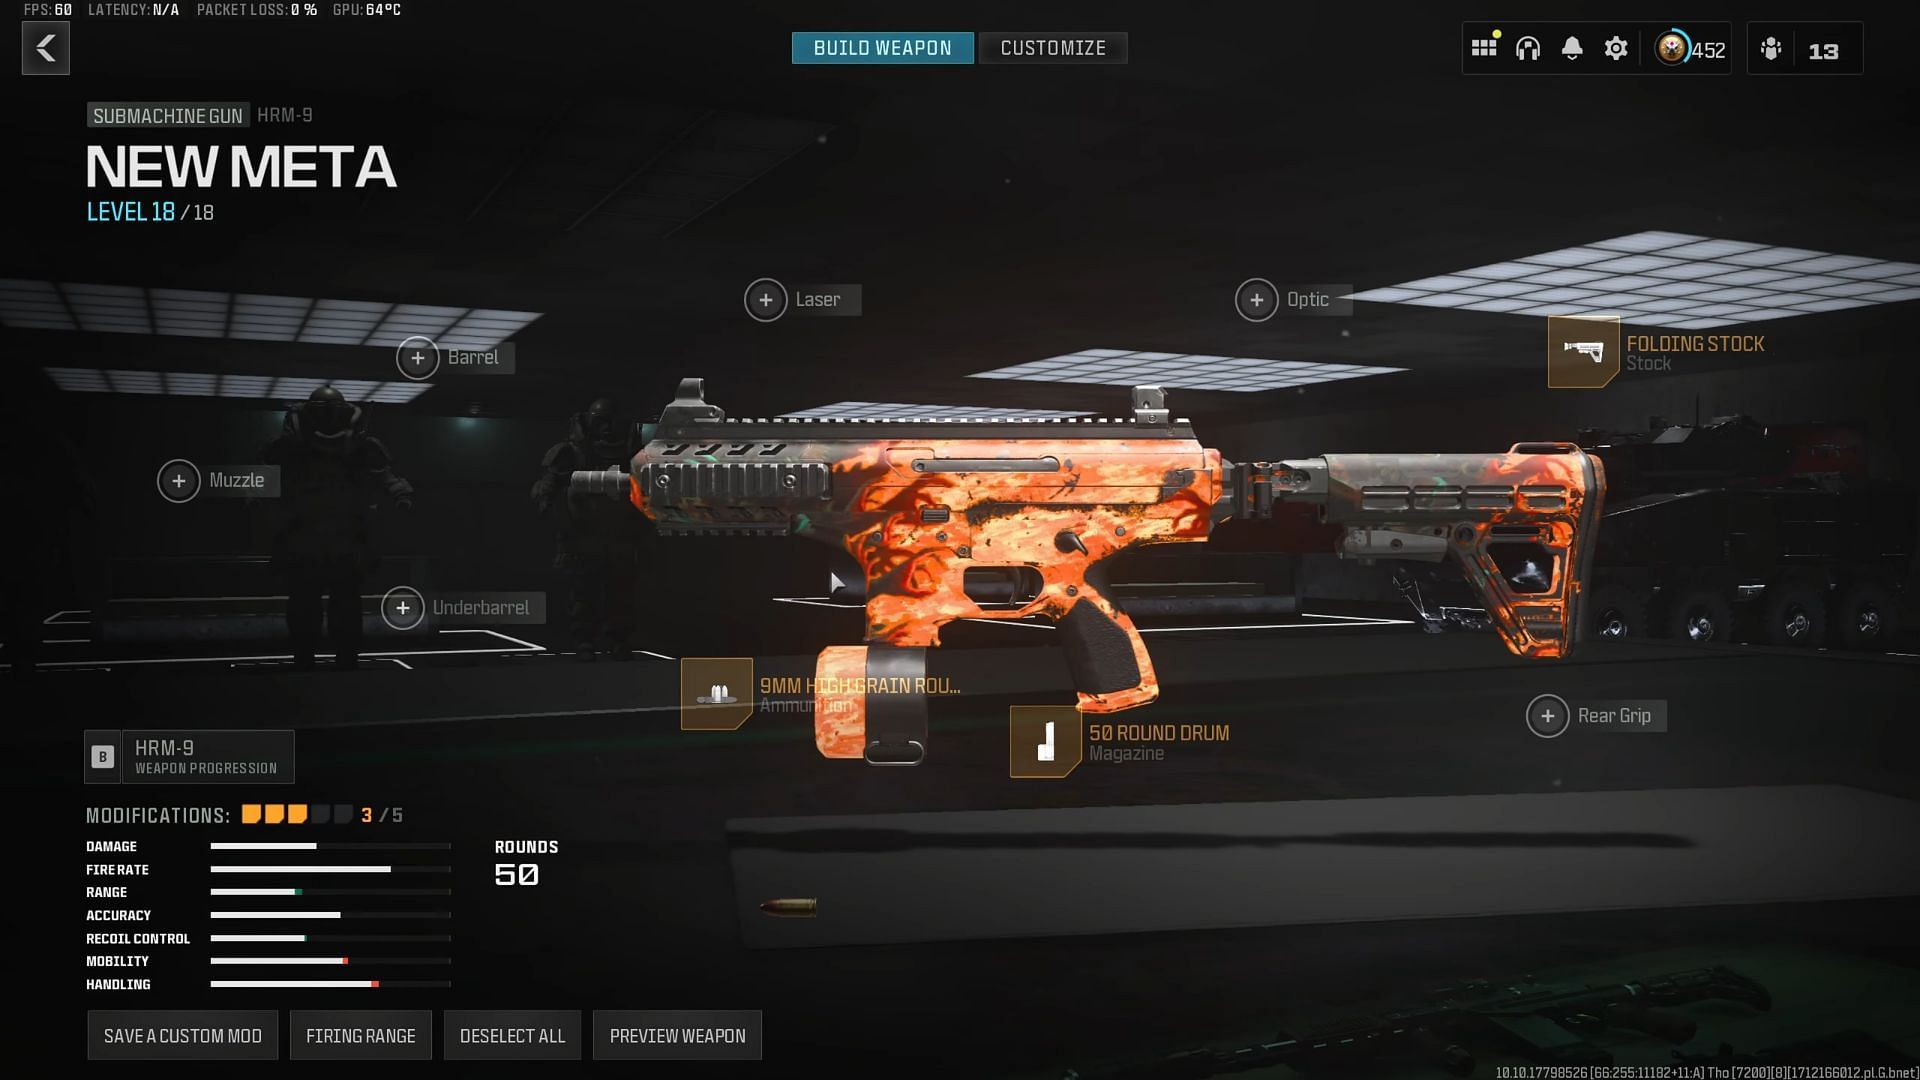 HRM9 SMG loadout in MW3 (Image via IsaacAndersn/Activision YouTube)